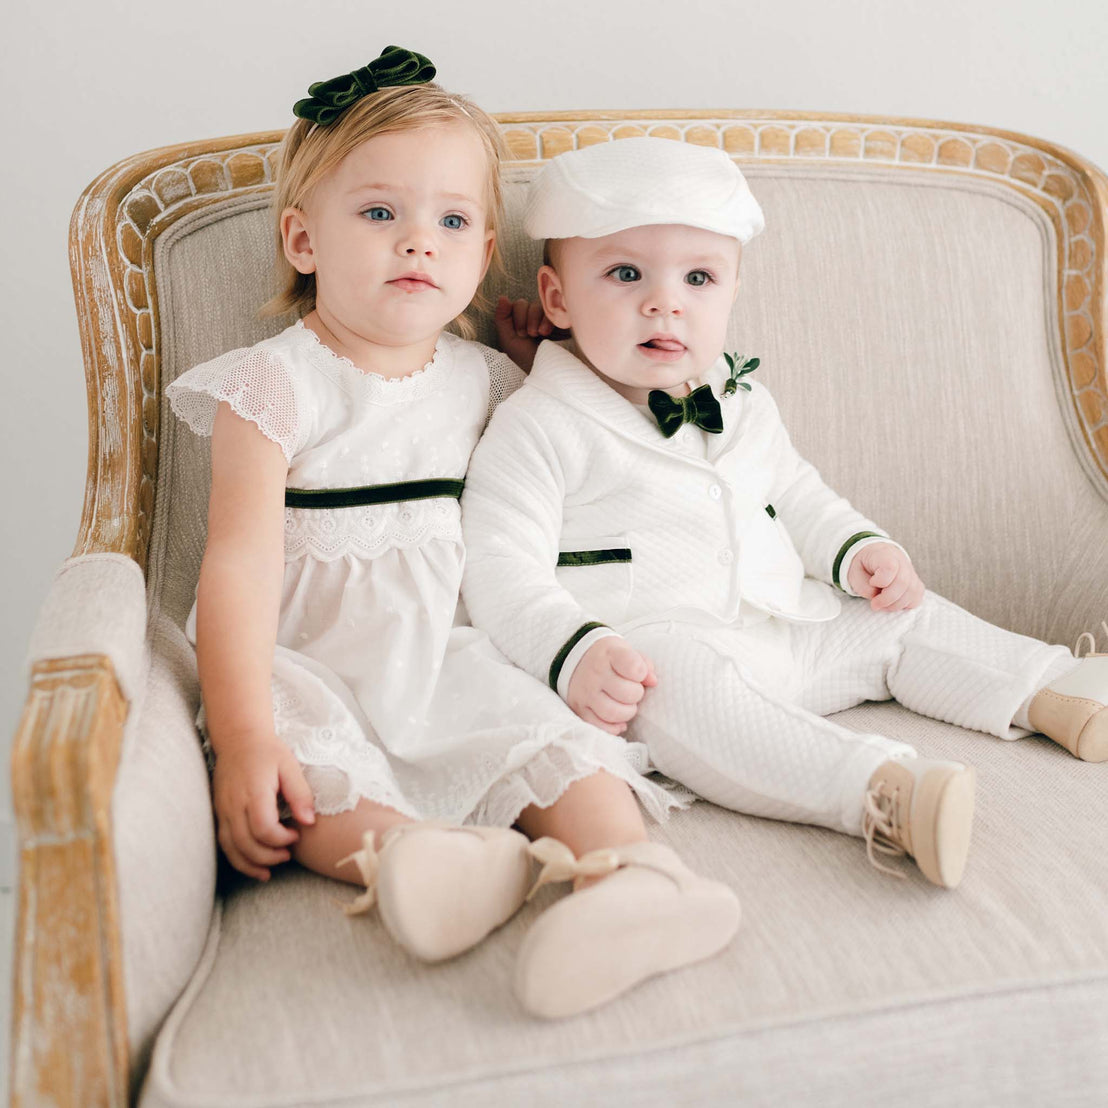 Two toddlers dressed in Emily Dress & Bloomers with a Green Sash sitting on a beige couch for a christening. The girl is in a white dress with a green headband; the boy wears a white suit complemented.